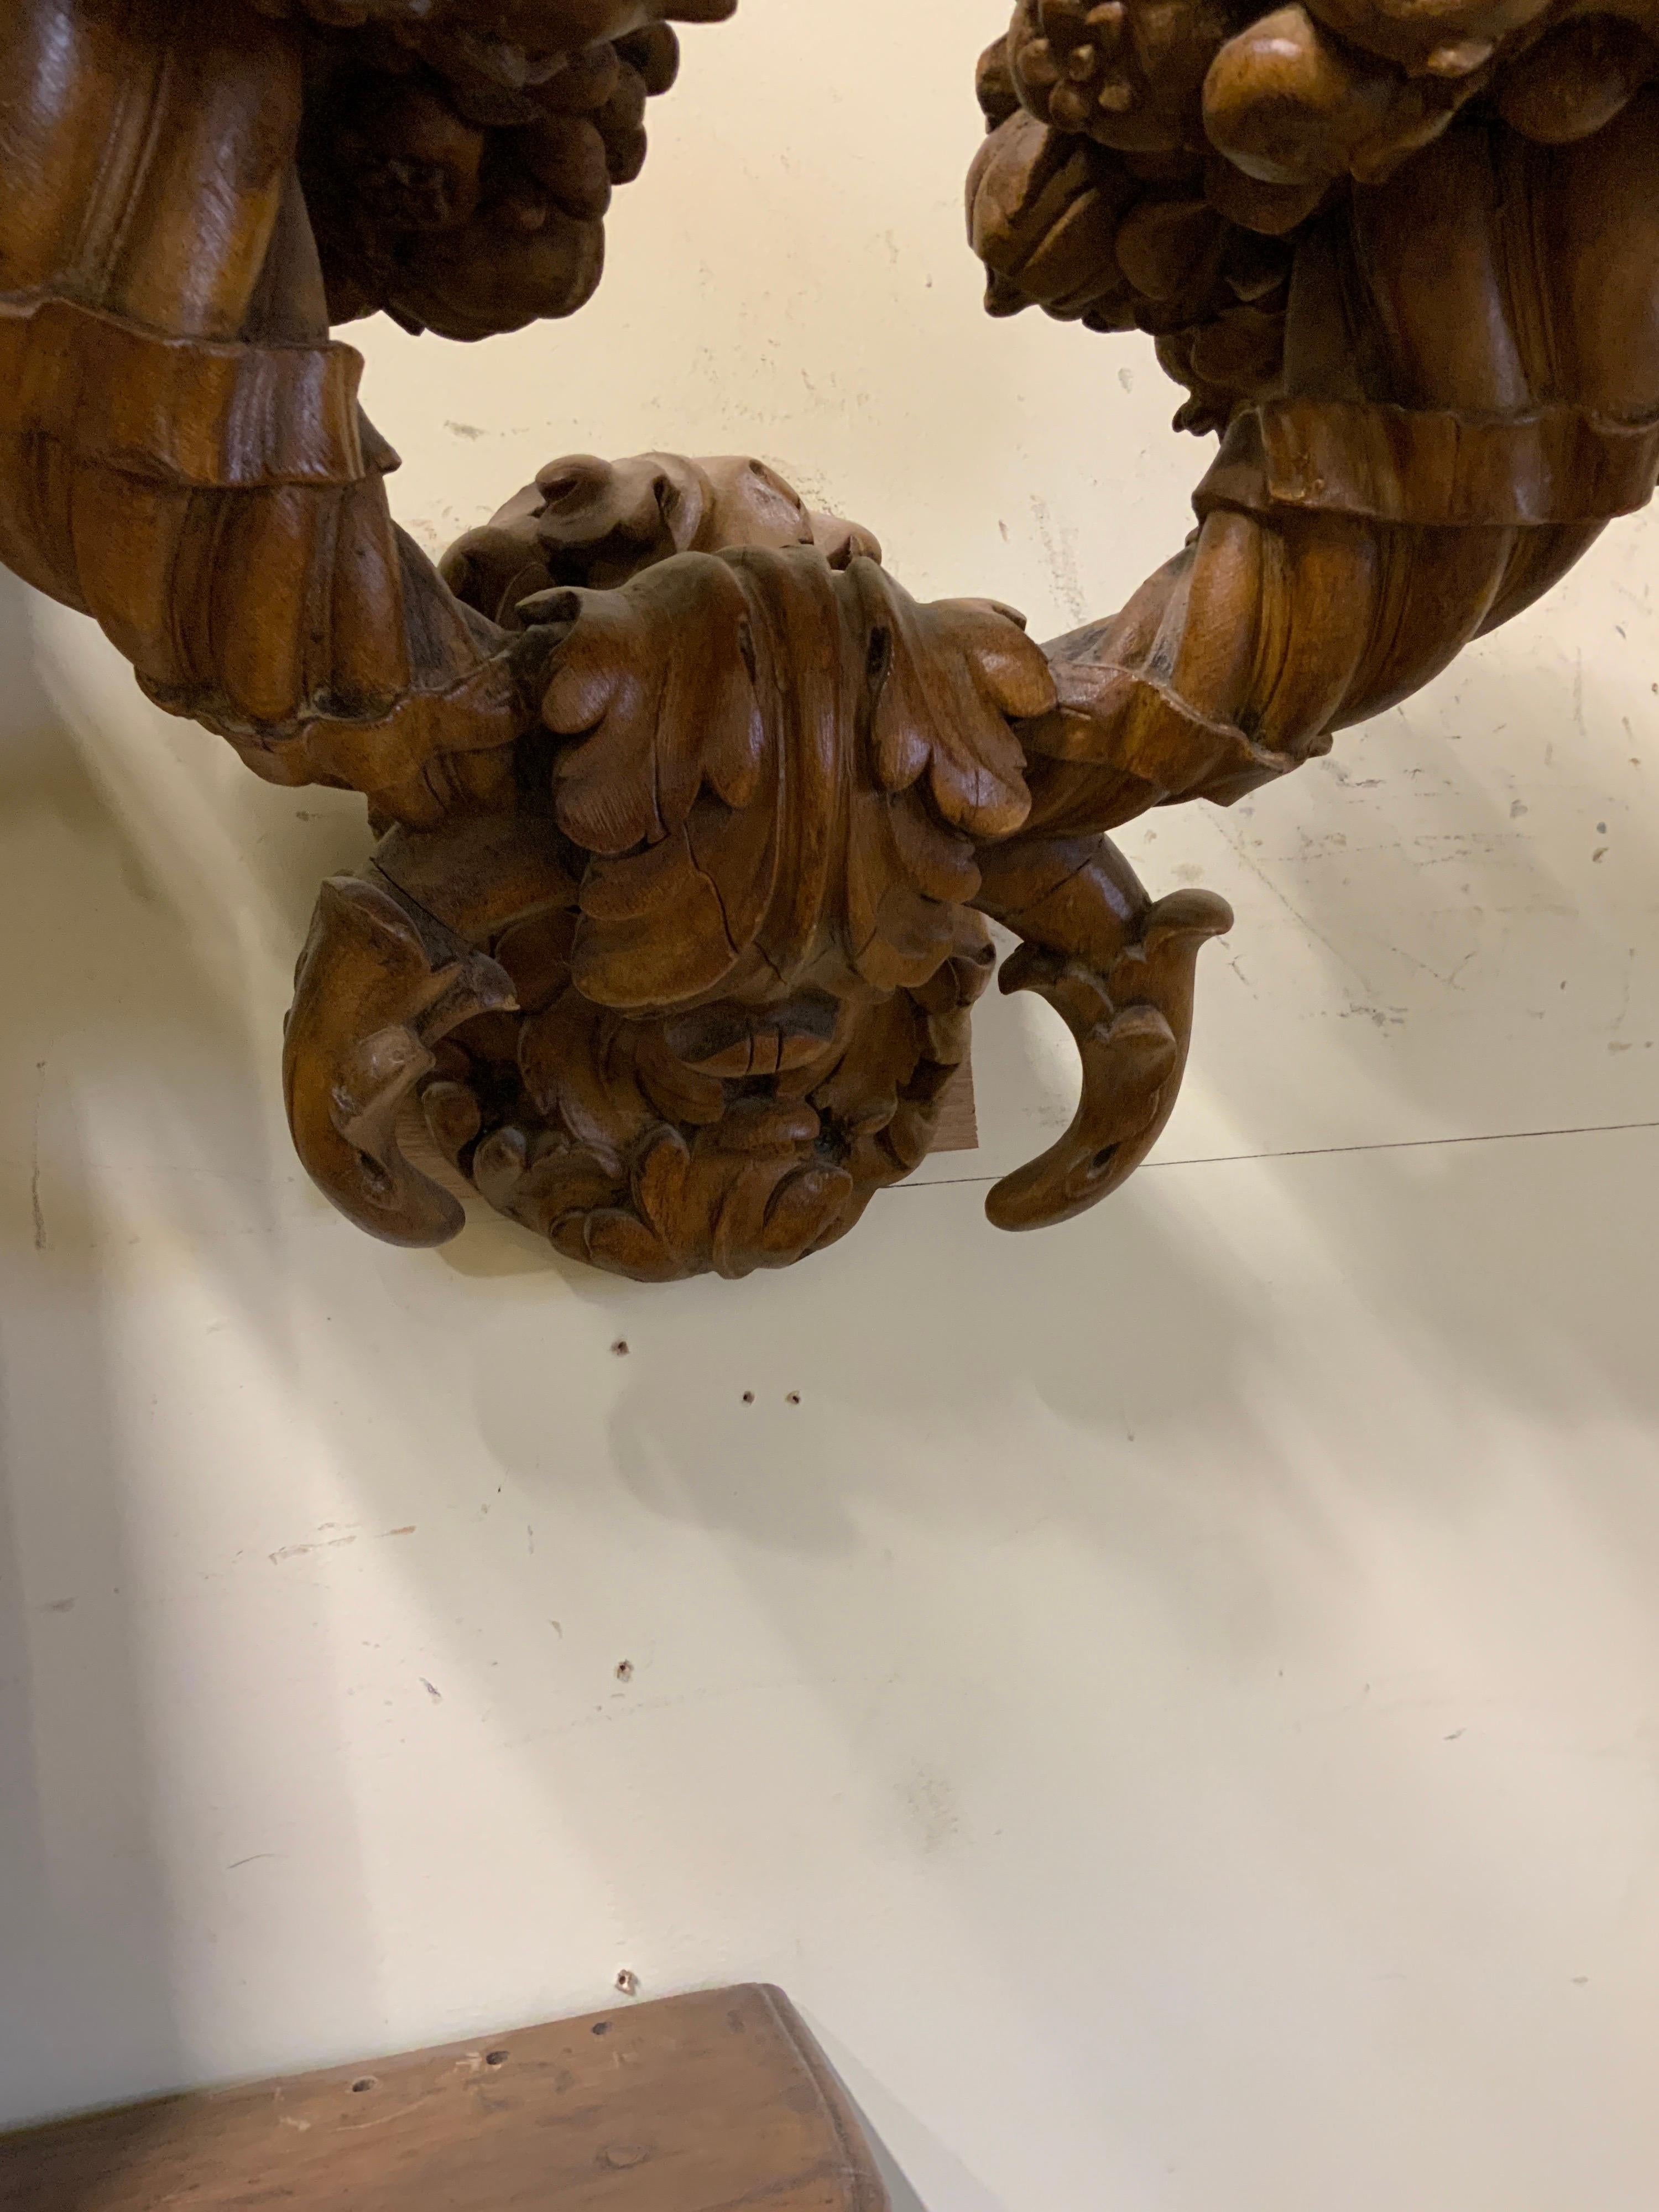 19th Century Wood Carving Decorative Object In Good Condition For Sale In Dallas, TX